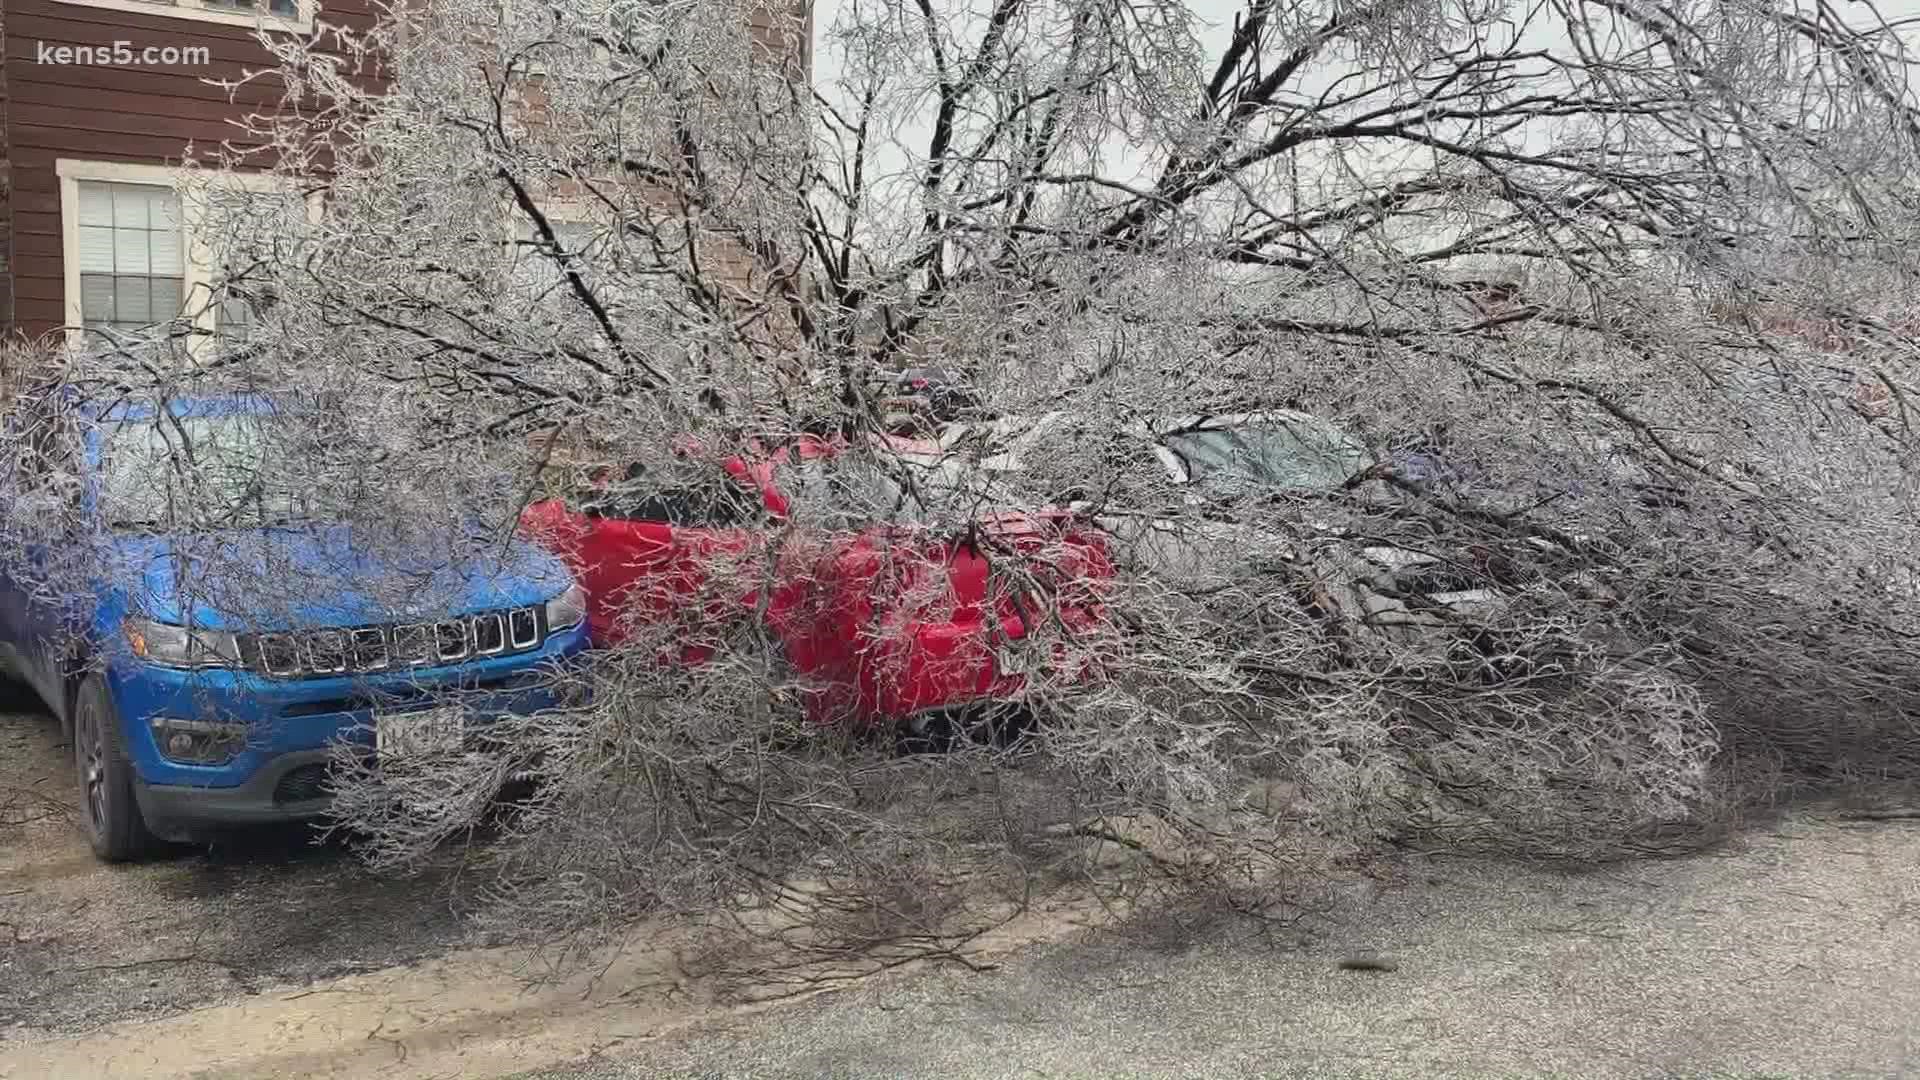 Experts said ice can increase the weight of branches up to 30 times.